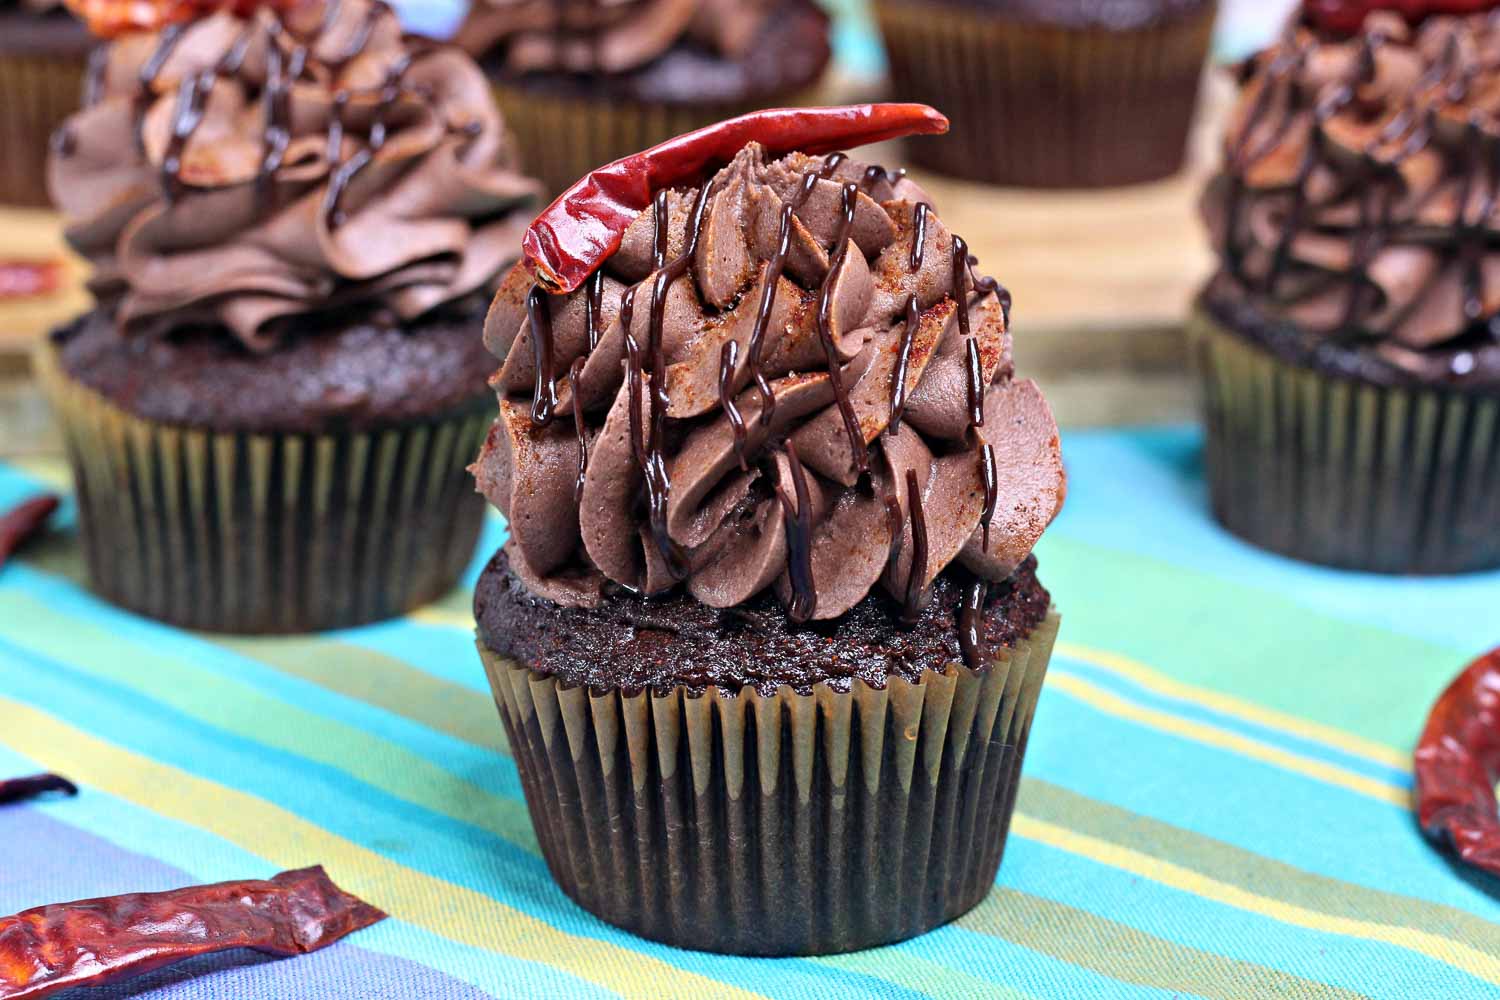 Take your love for cupcakes a little further by making these Spicy Chocolate Cupcakes. They are simple to make and so delicious to eat!